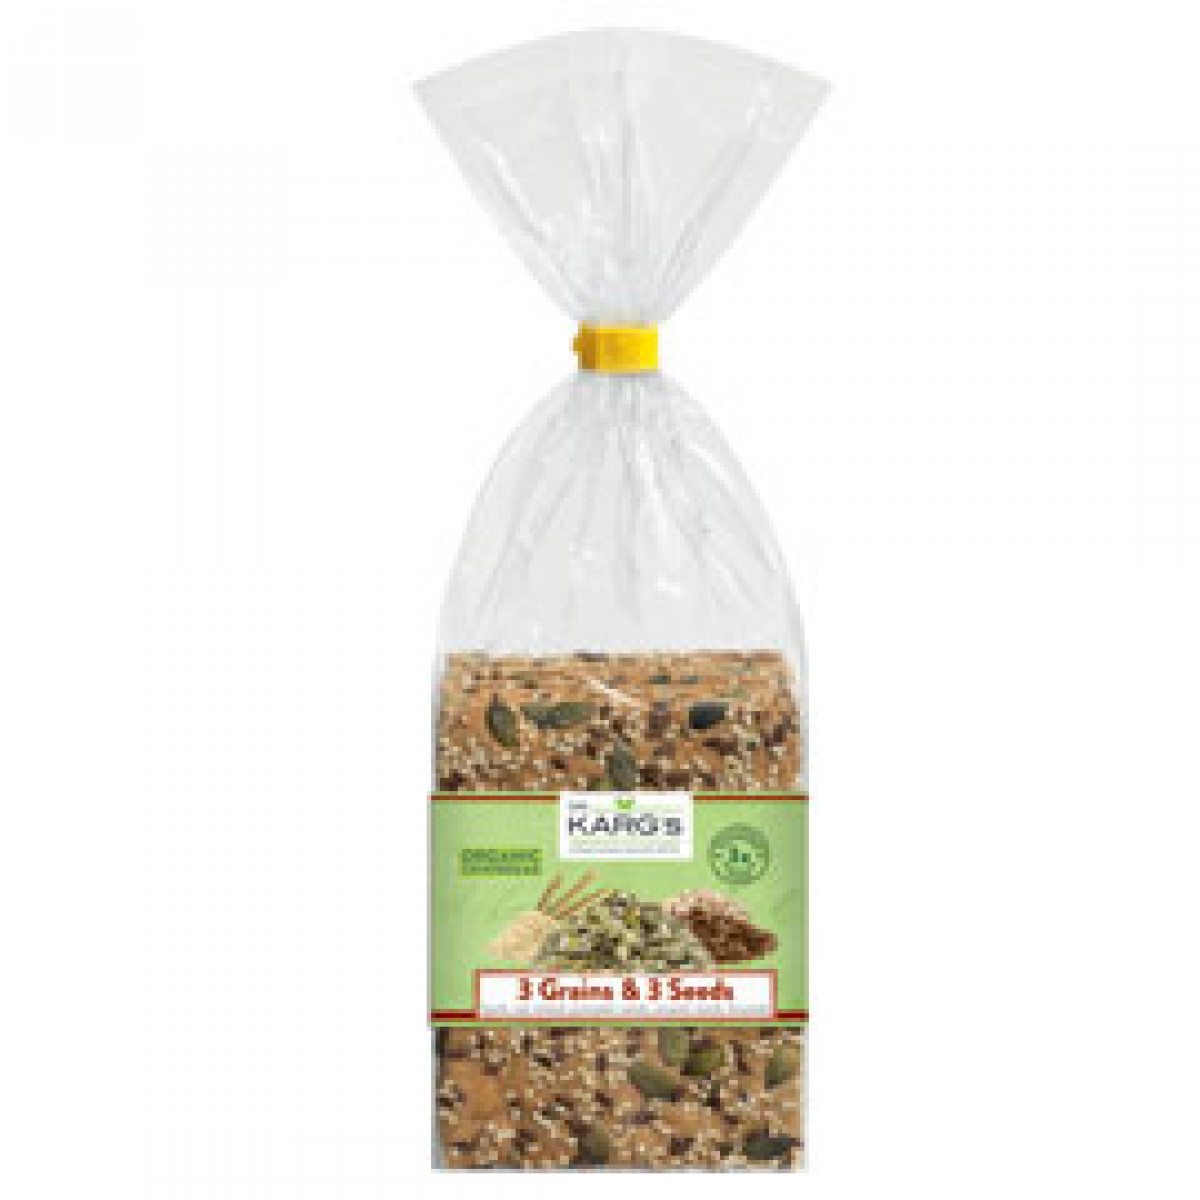 Product picture for 3 Grains + 3 Seeds Crispbread